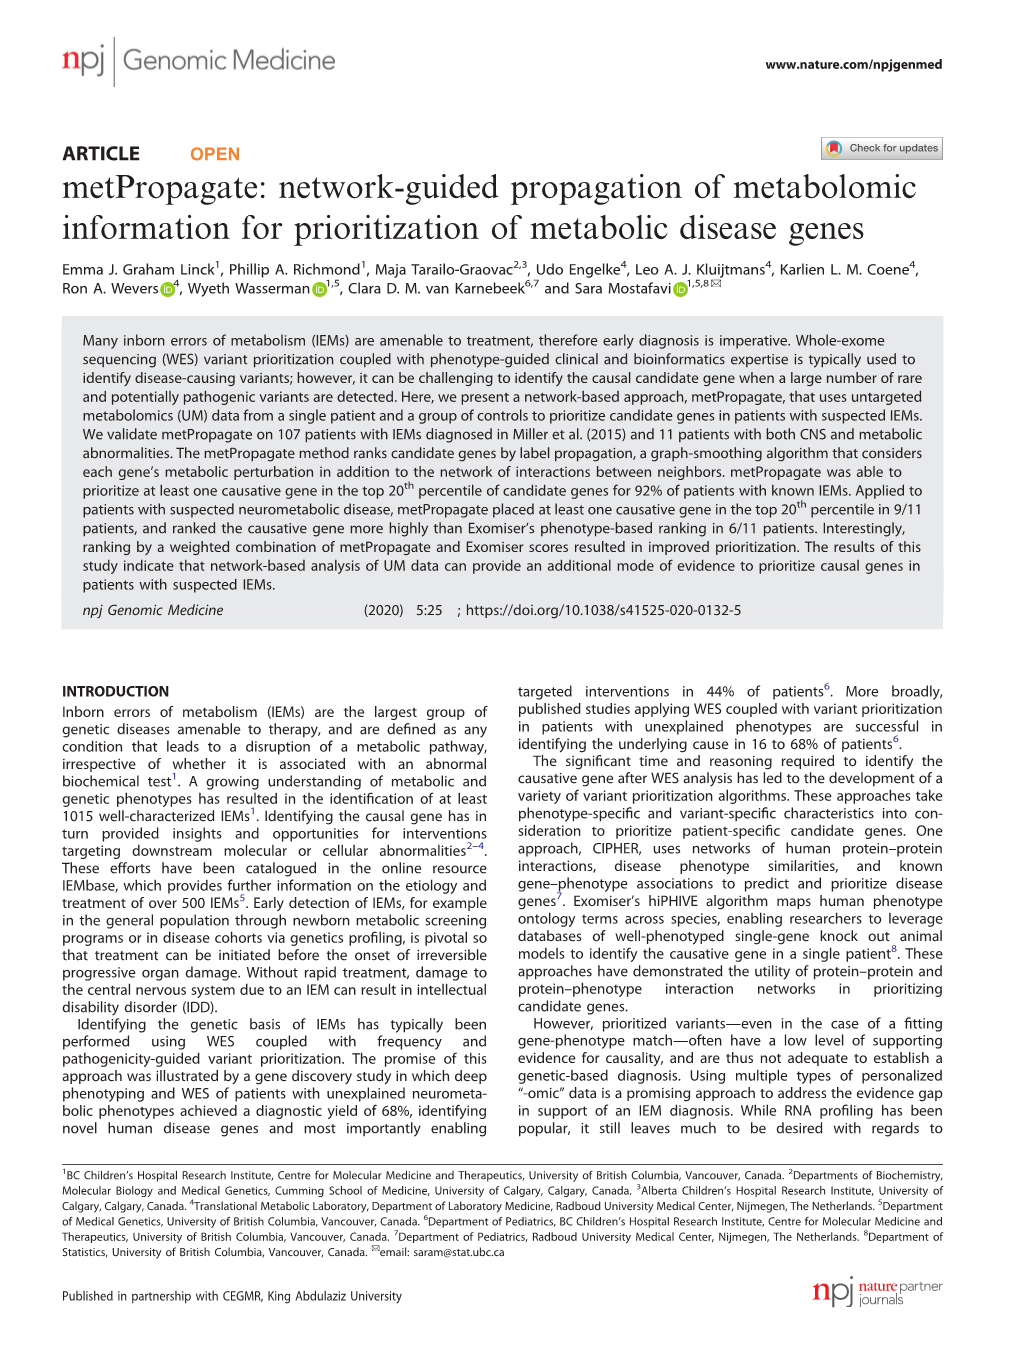 Network-Guided Propagation of Metabolomic Information for Prioritization of Metabolic Disease Genes